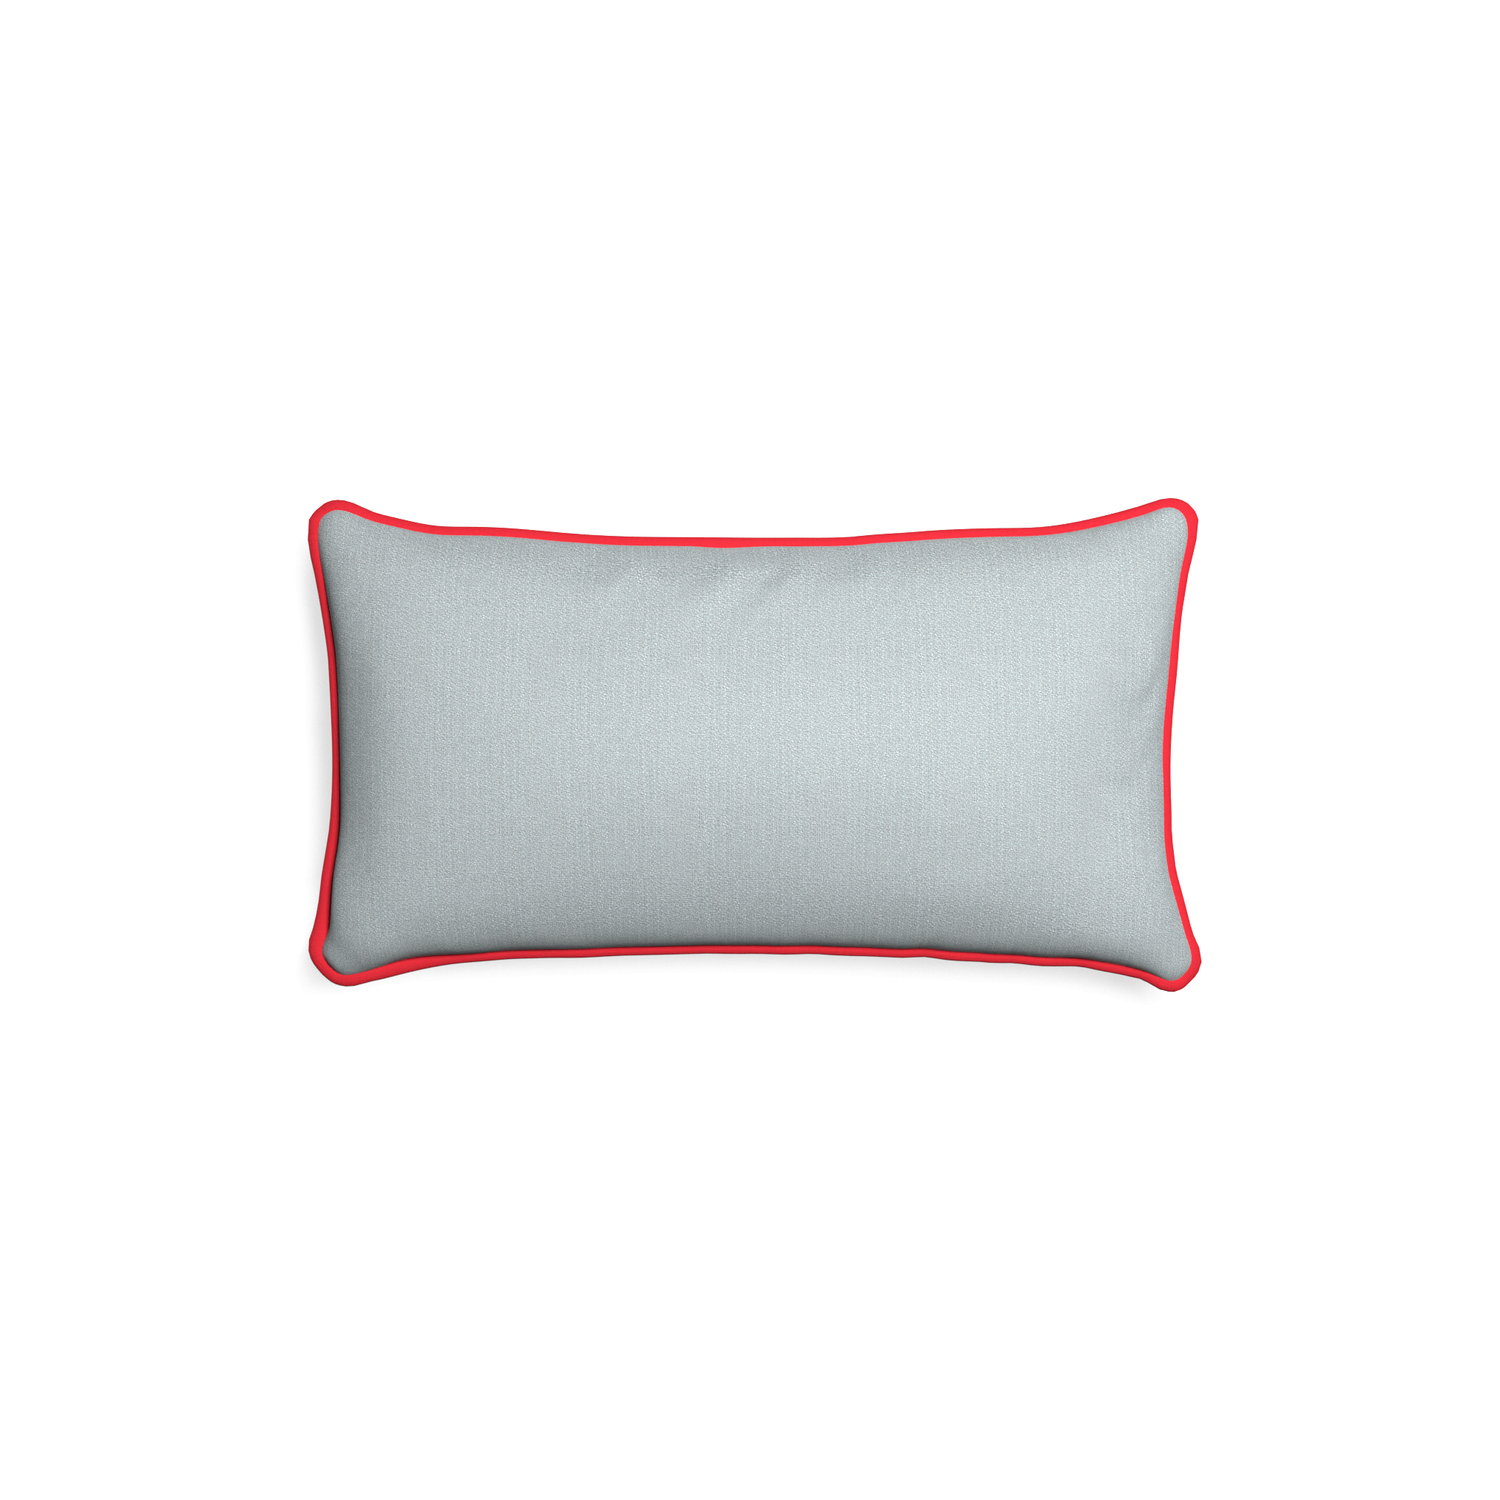 Petite-lumbar sea custom grey bluepillow with cherry piping on white background